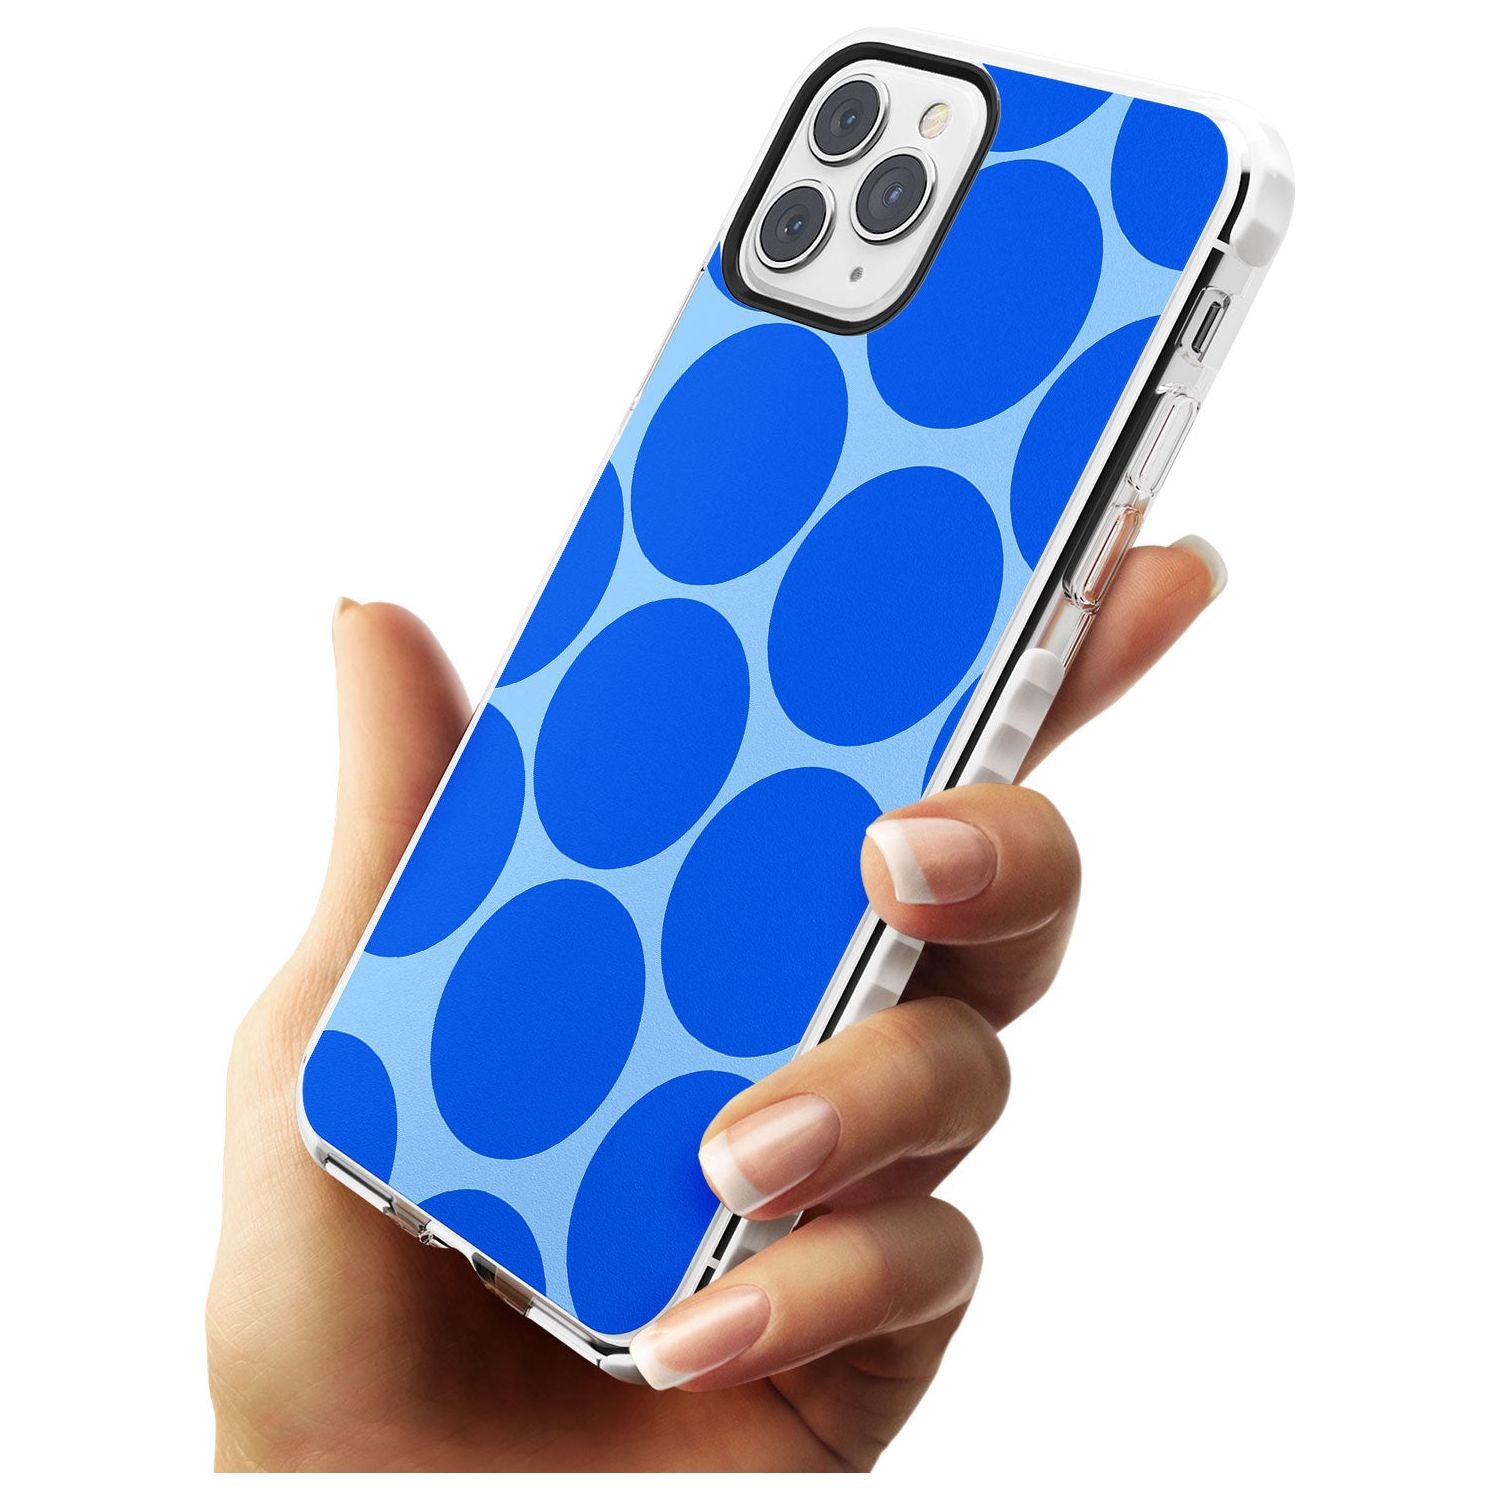 Abstract Retro Shapes: Blue Dots Slim TPU Phone Case for iPhone 11 Pro Max